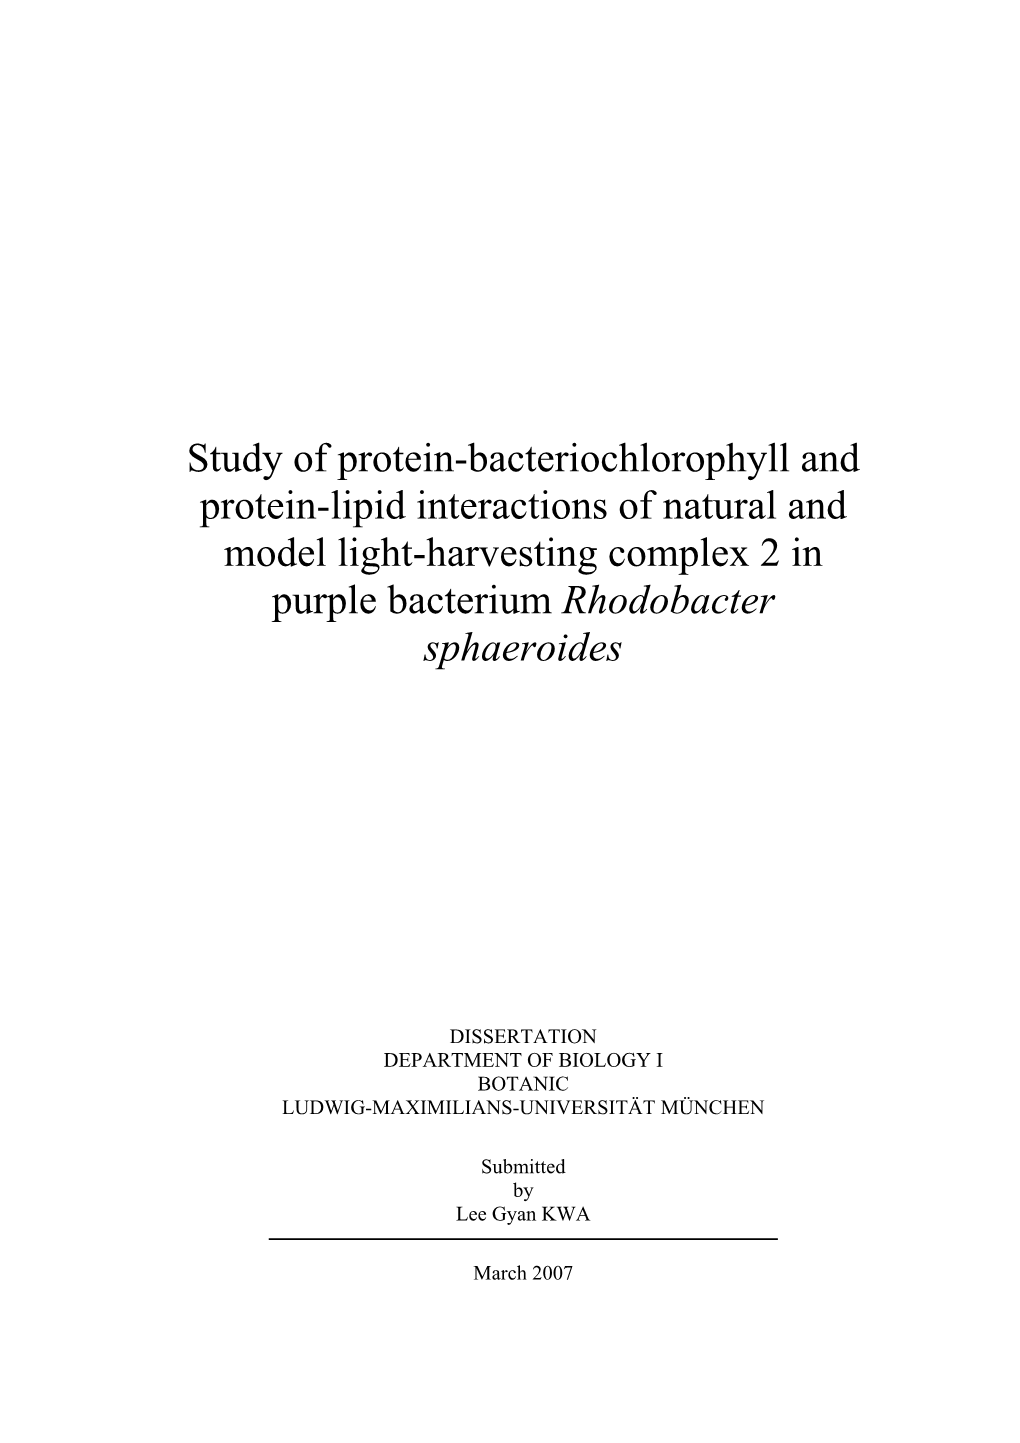 Study of Protein-Bacteriochlorophyll and Protein-Lipid Interactions of Natural and Model Light-Harvesting Complex 2 in Purple Bacterium Rhodobacter Sphaeroides